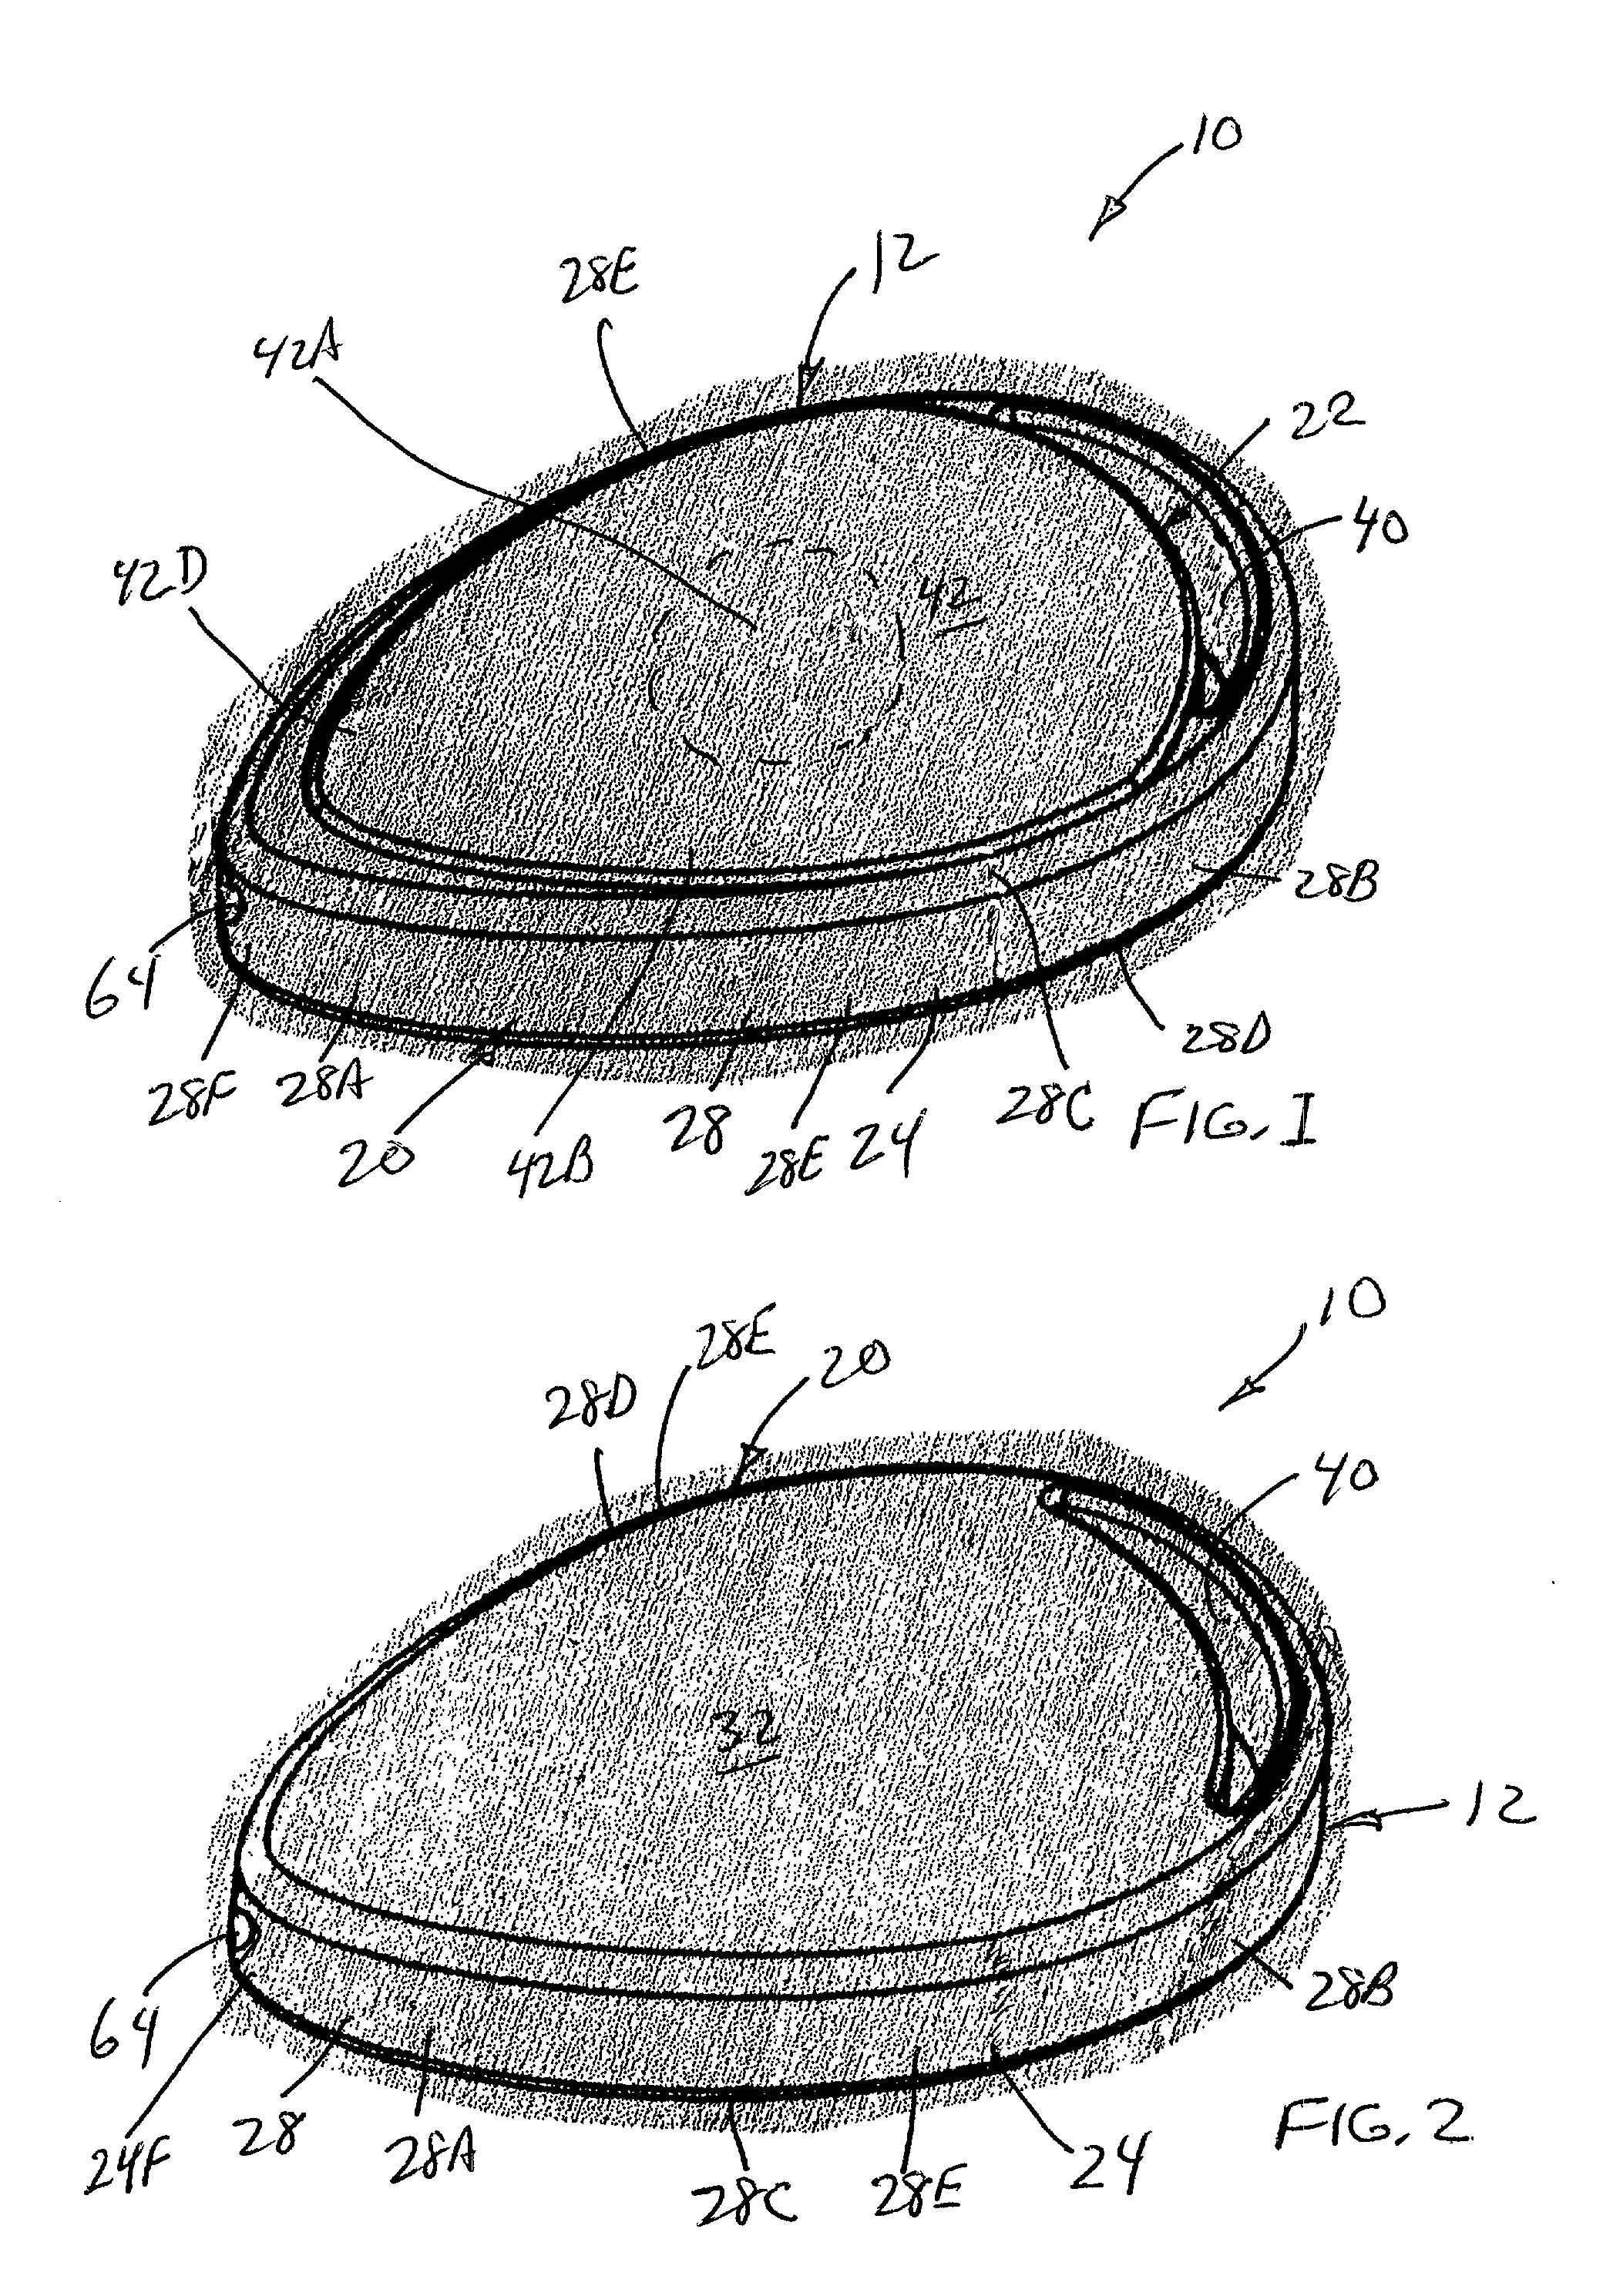 Miniature flashlight device having housing with outer and inner enclosures